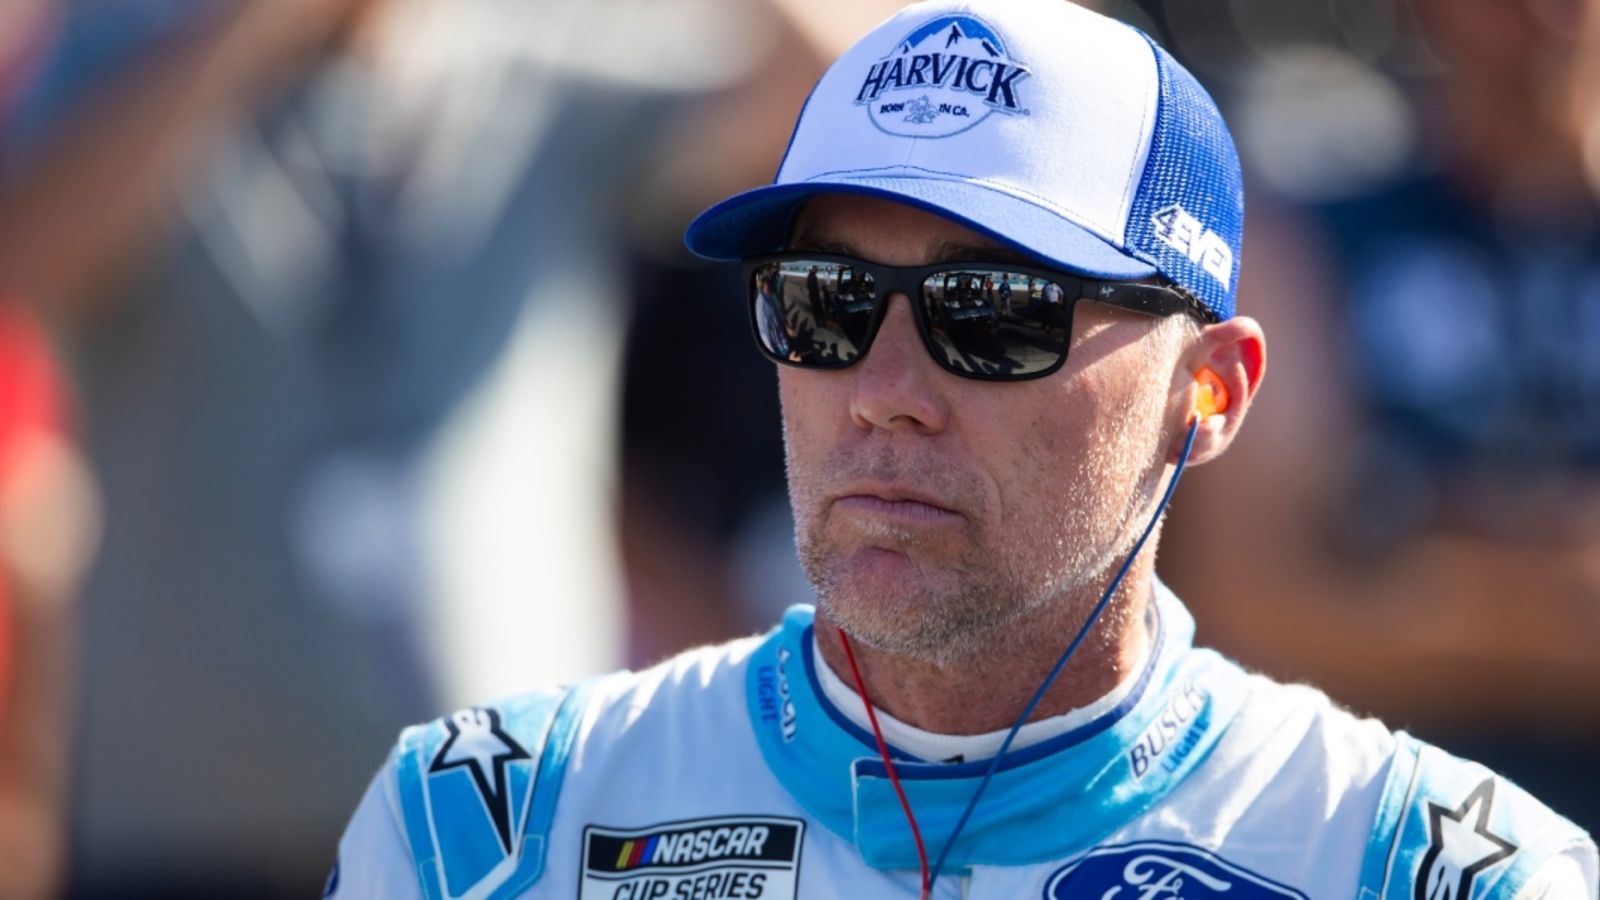 Kevin Harvick circles four drivers to watch at Phoenix, but adds massive hedge